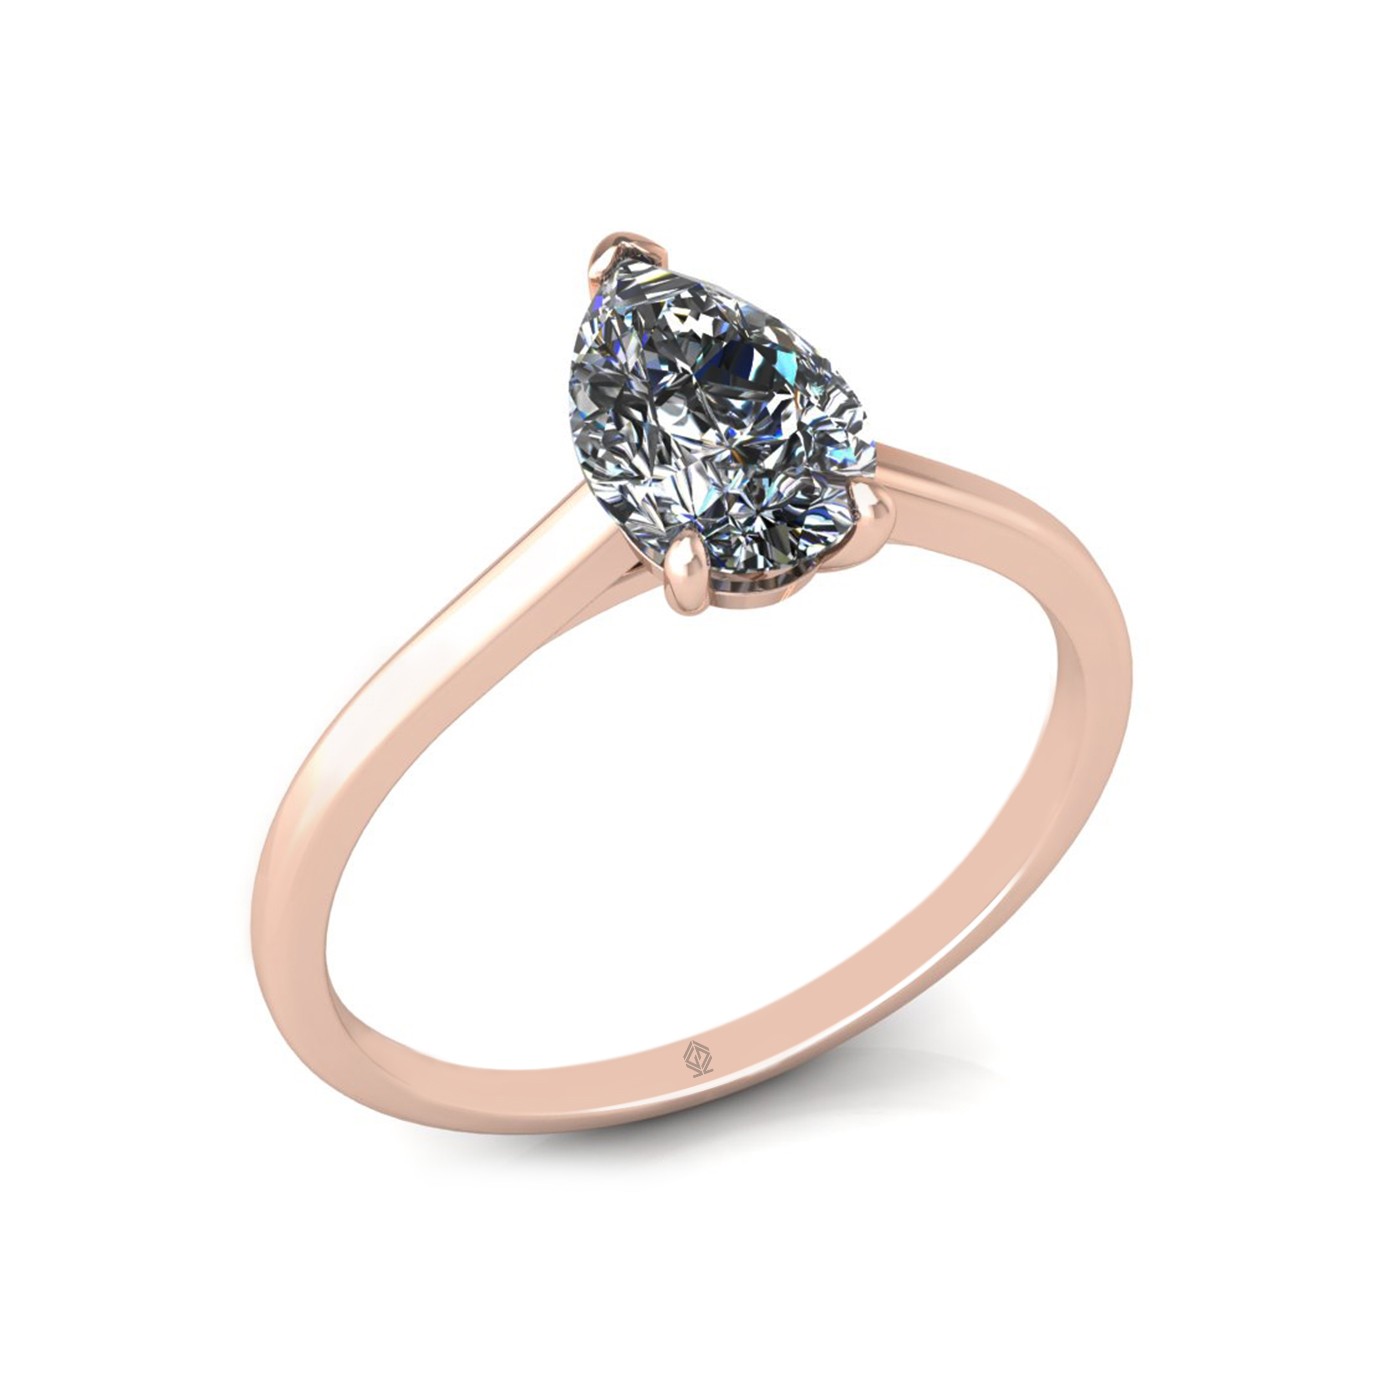 18k rose gold  1,00 ct 3 prongs solitaire pear cut diamond engagement ring with whisper thin band